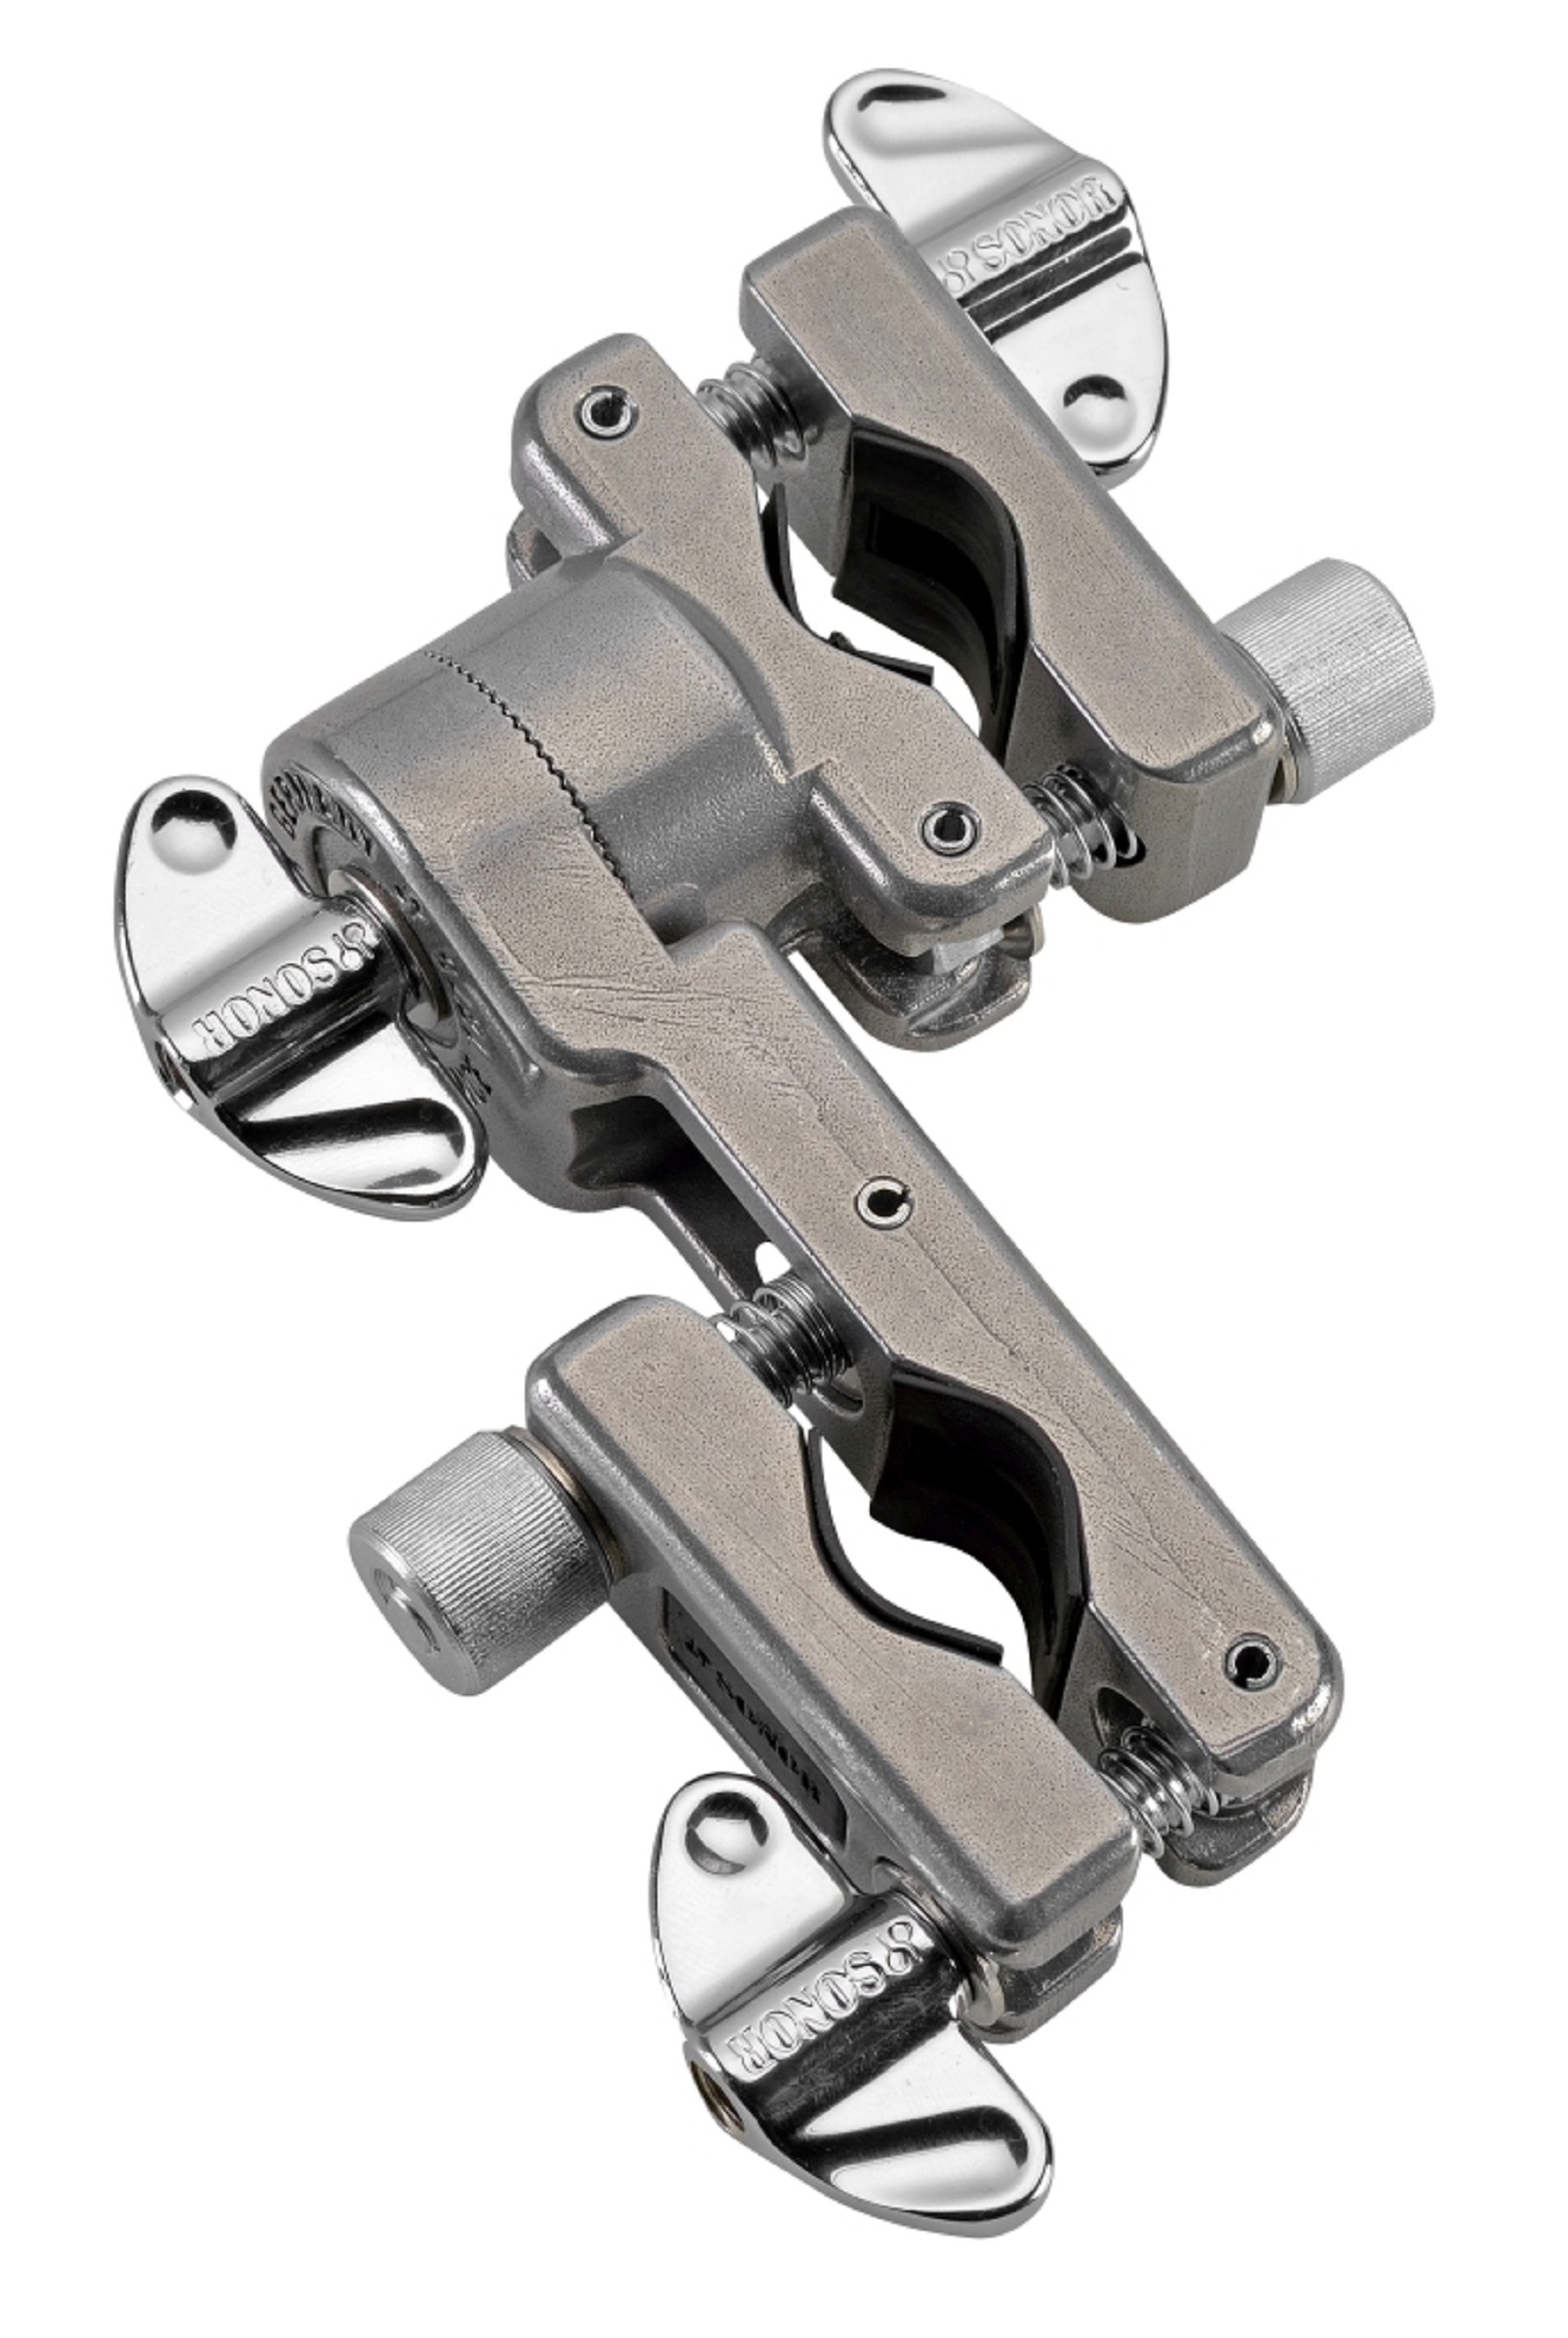 Sonor MH-AC Adjustable Clamp